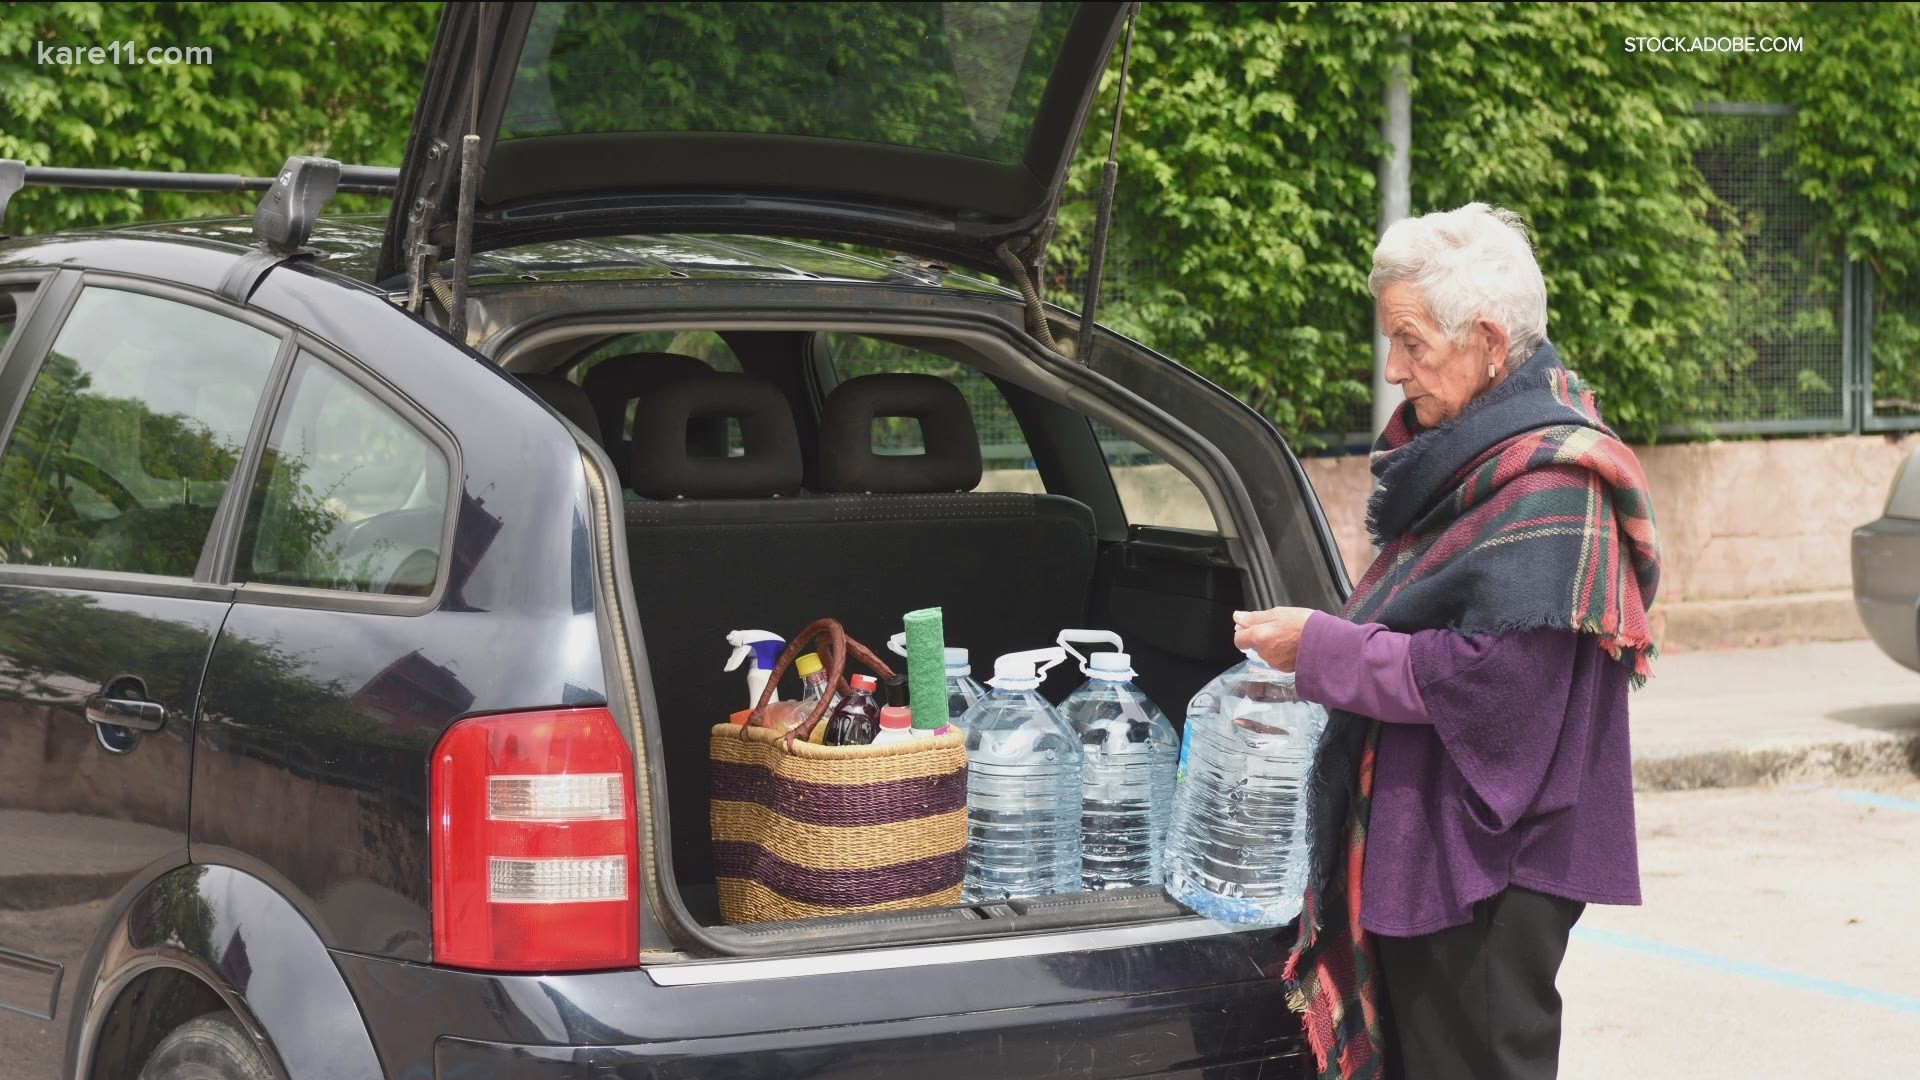 AARP helps mature, experienced adults drive longer on the roads and stay connected to their communities.